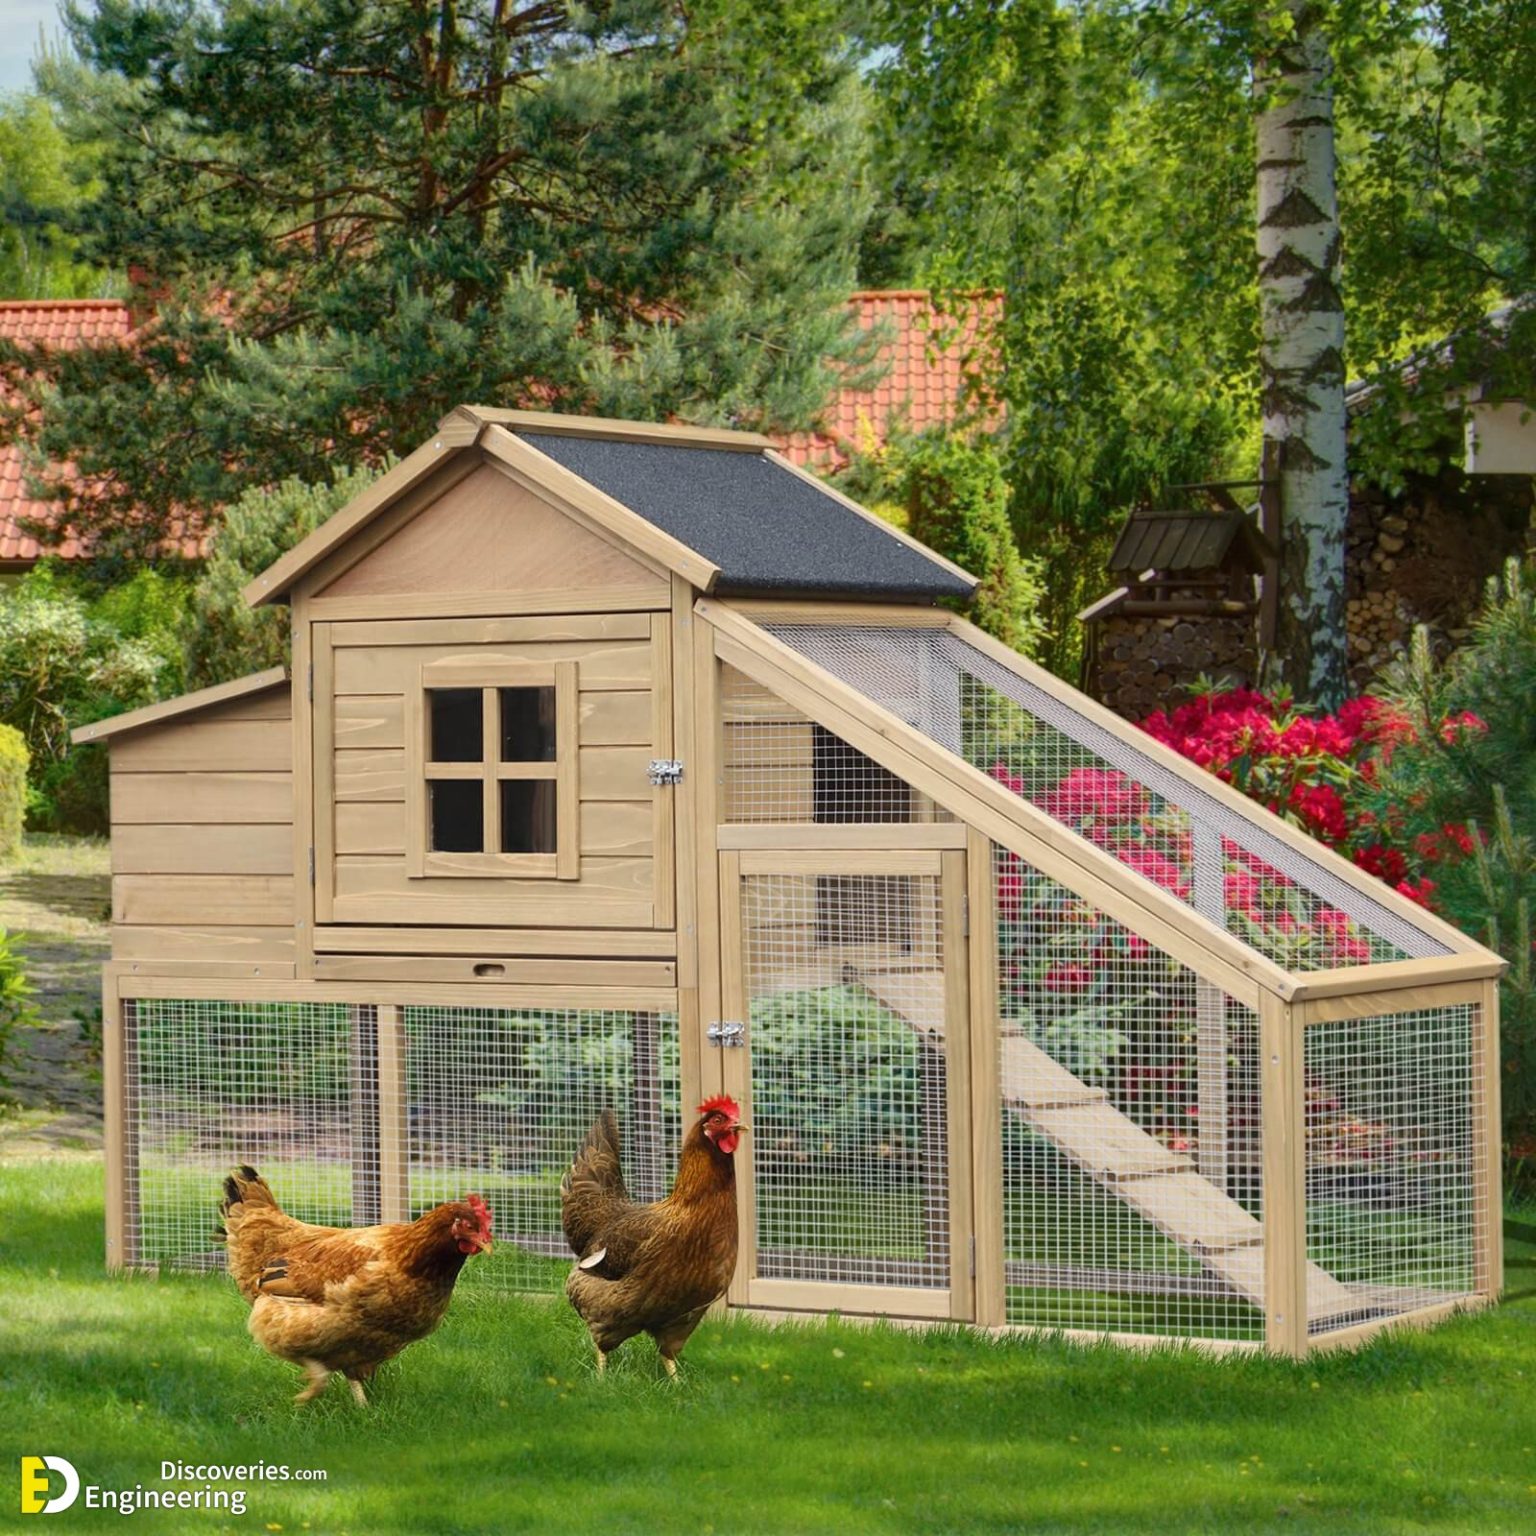 50 Beautiful DIY Chicken Coop Ideas You Can Actually Build ... - 05a1beb6 E0b5 4460 8050 De0Db883a561 1.5eD584c2153DecD7fa8D6725420c171f 1536x1536